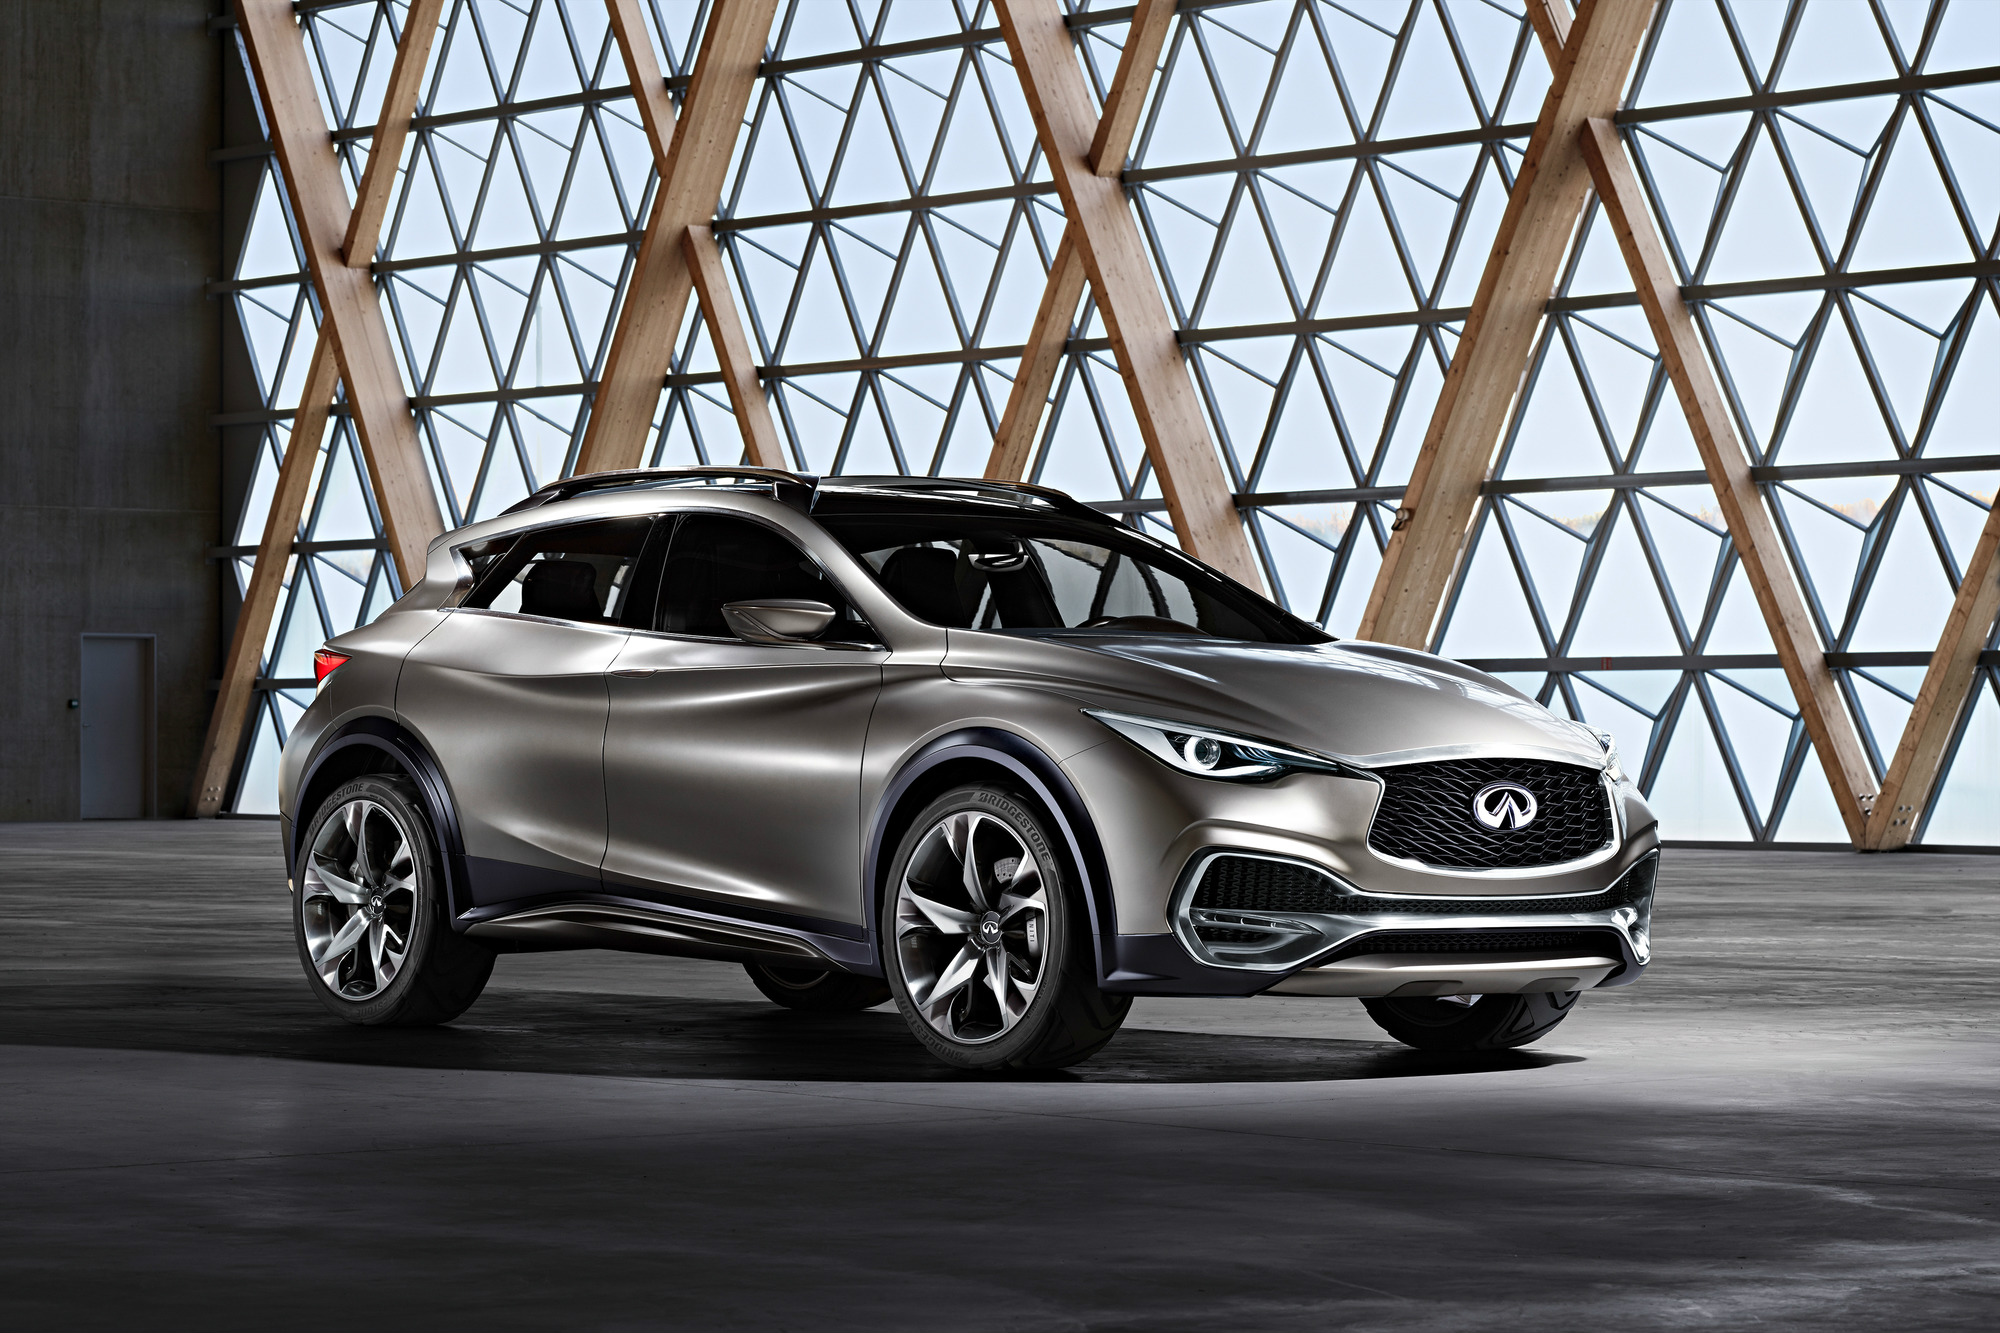 Preview of the 2015 Los Angeles motor show, including the Infiniti Q30